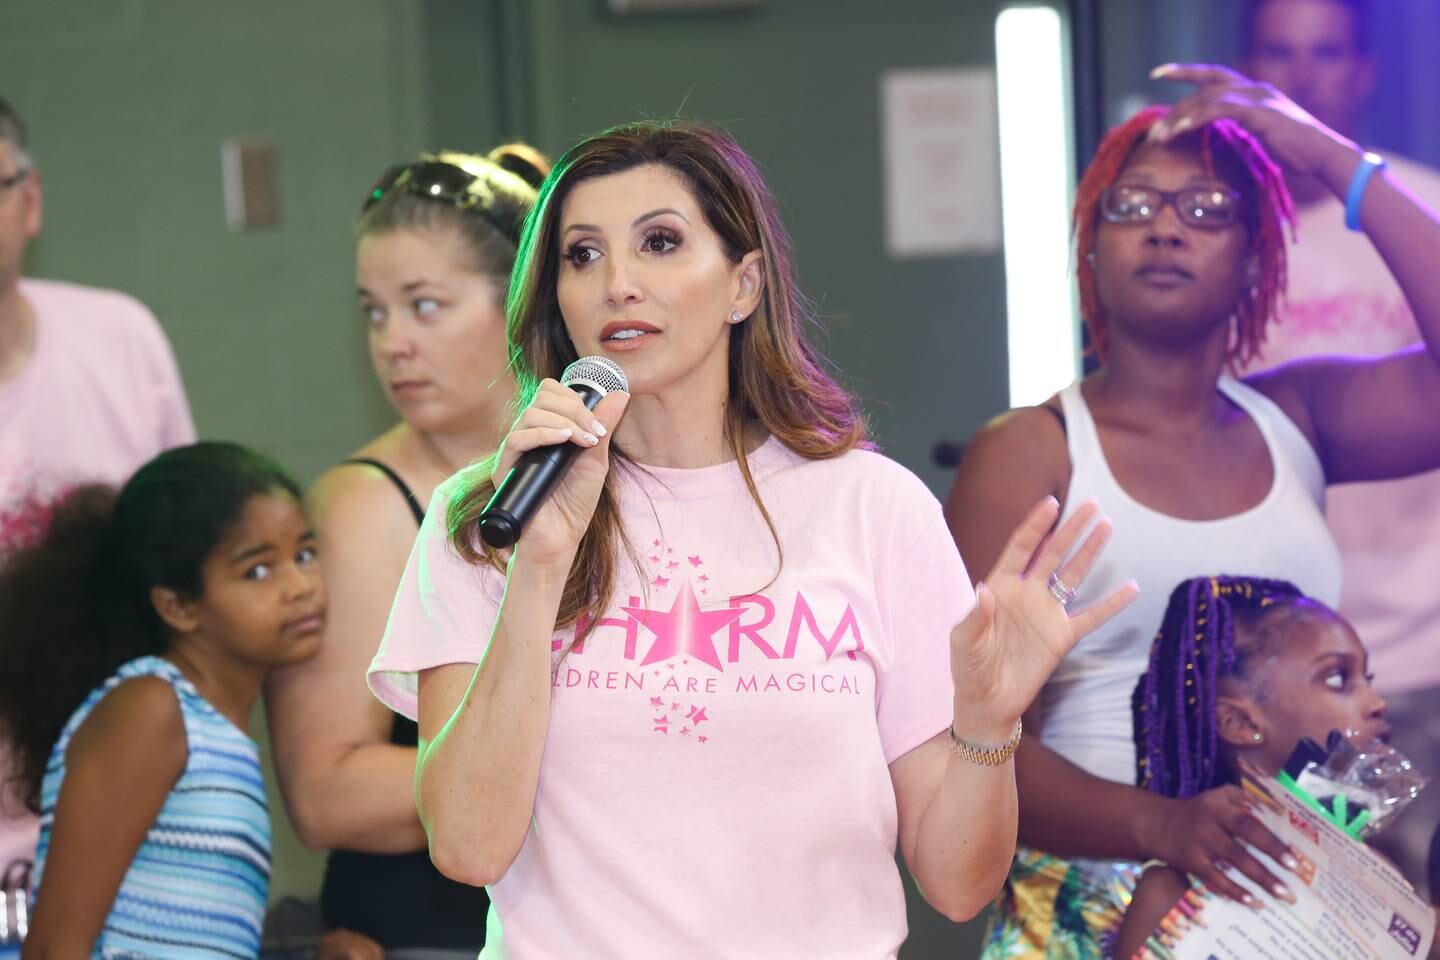 Charm Foundation founder Jaclyn Stapp speaks during The Charm Foundation Back To School Bash at Kirkpatrick Centre on August 4, 2019 in Nashville, Tennessee. Getty Images